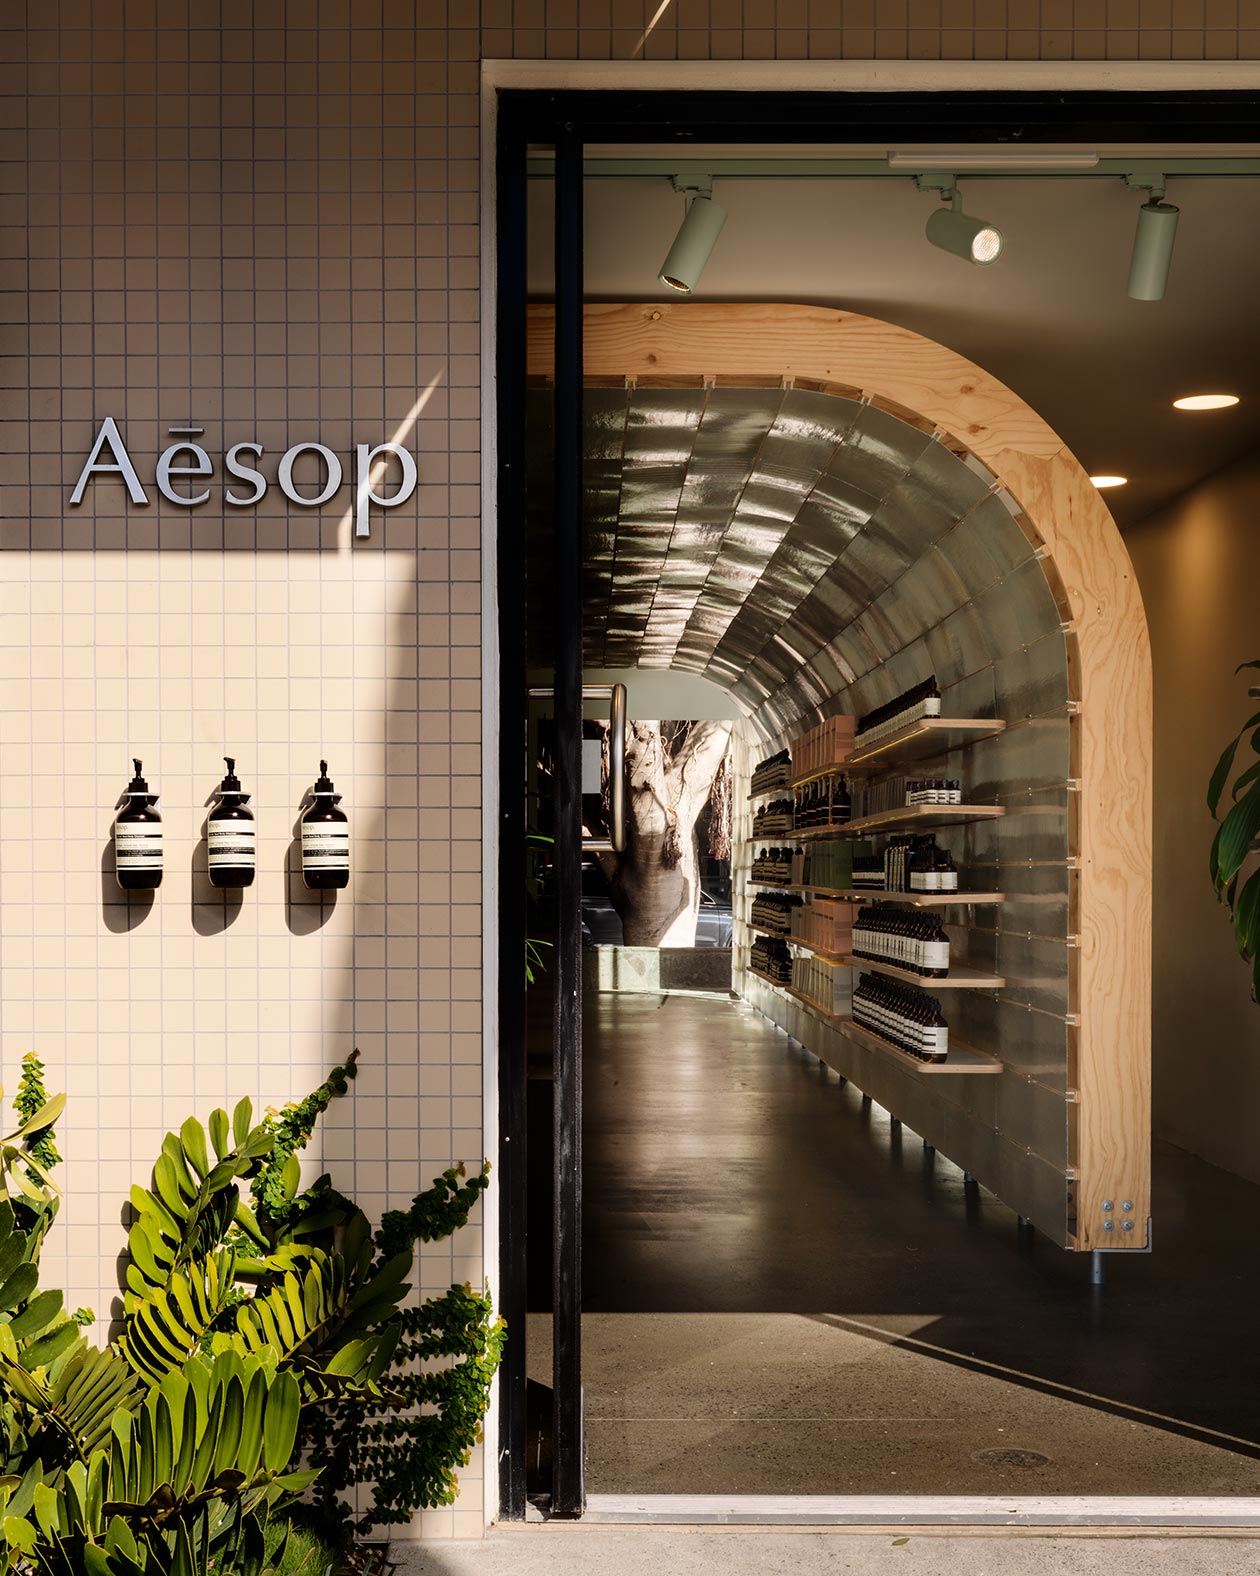 The entrance of Aesop James Street showing the tiled exterior. Three bottles of Aesop product hang by the entrance.